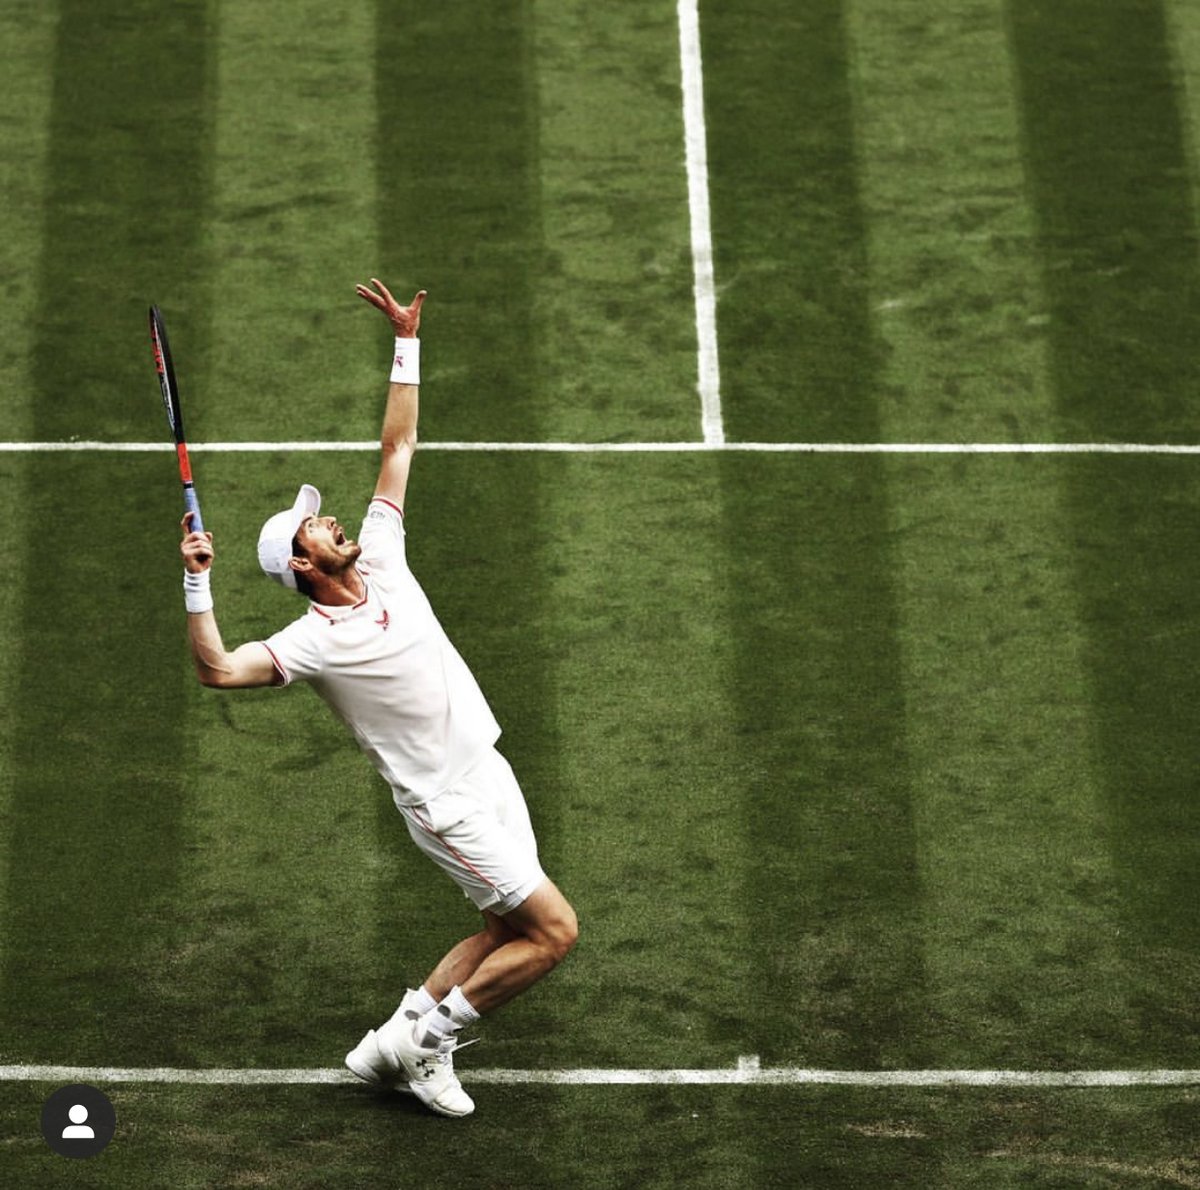 Andy is back on Centre Court today. Come on Andy, you’ve got this🎾 🙌🏻 #cromlixhotel #wimbledontennischapionships